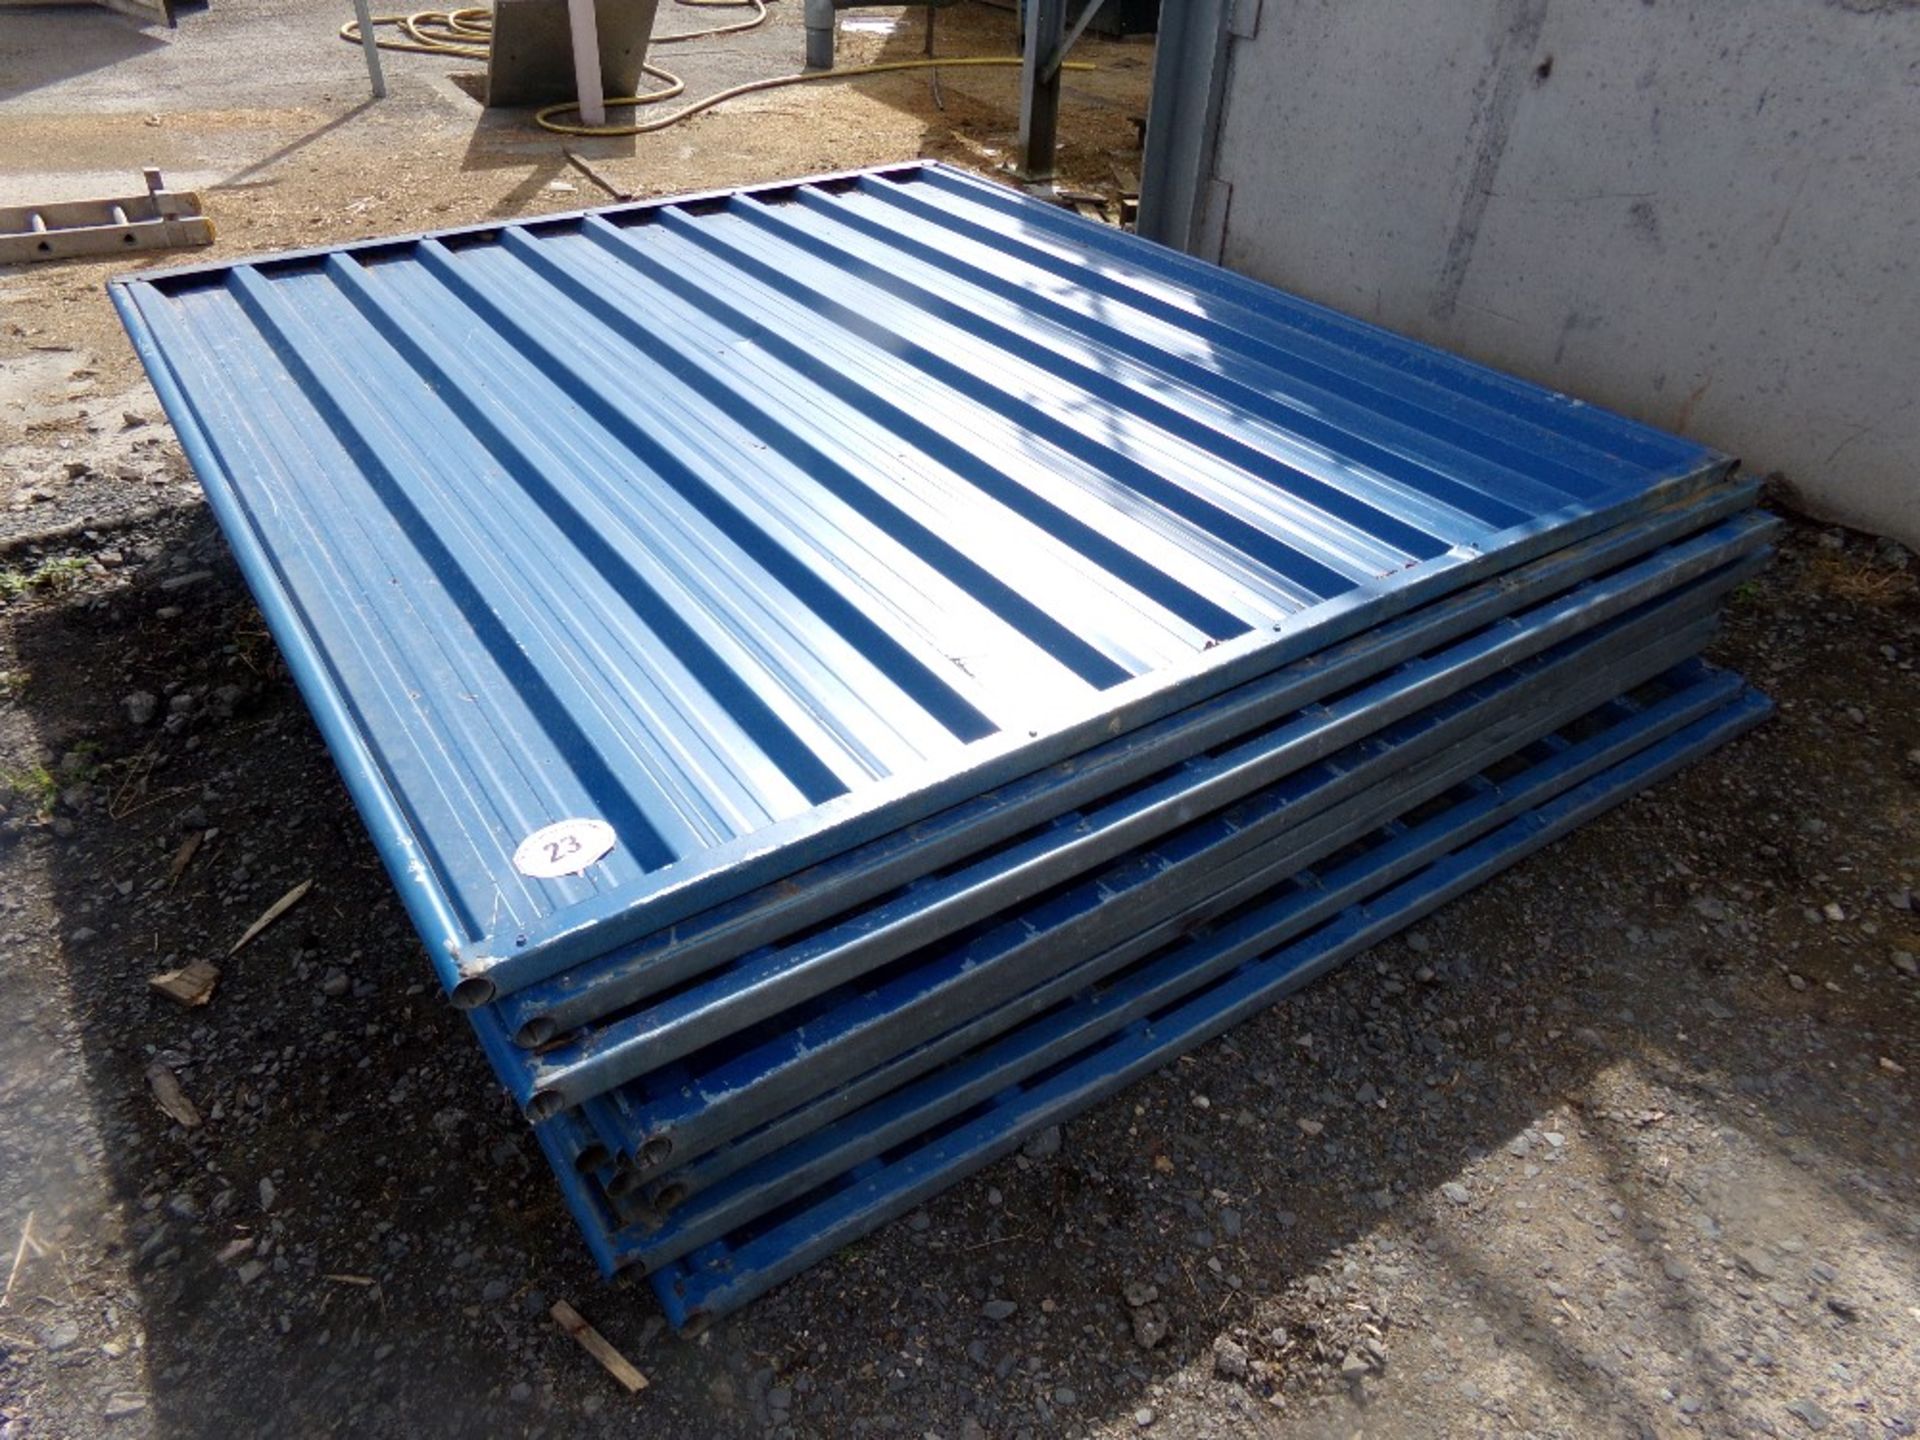 11 SOLID SITE PANELS 2.4M HIGH X 2.1M WI